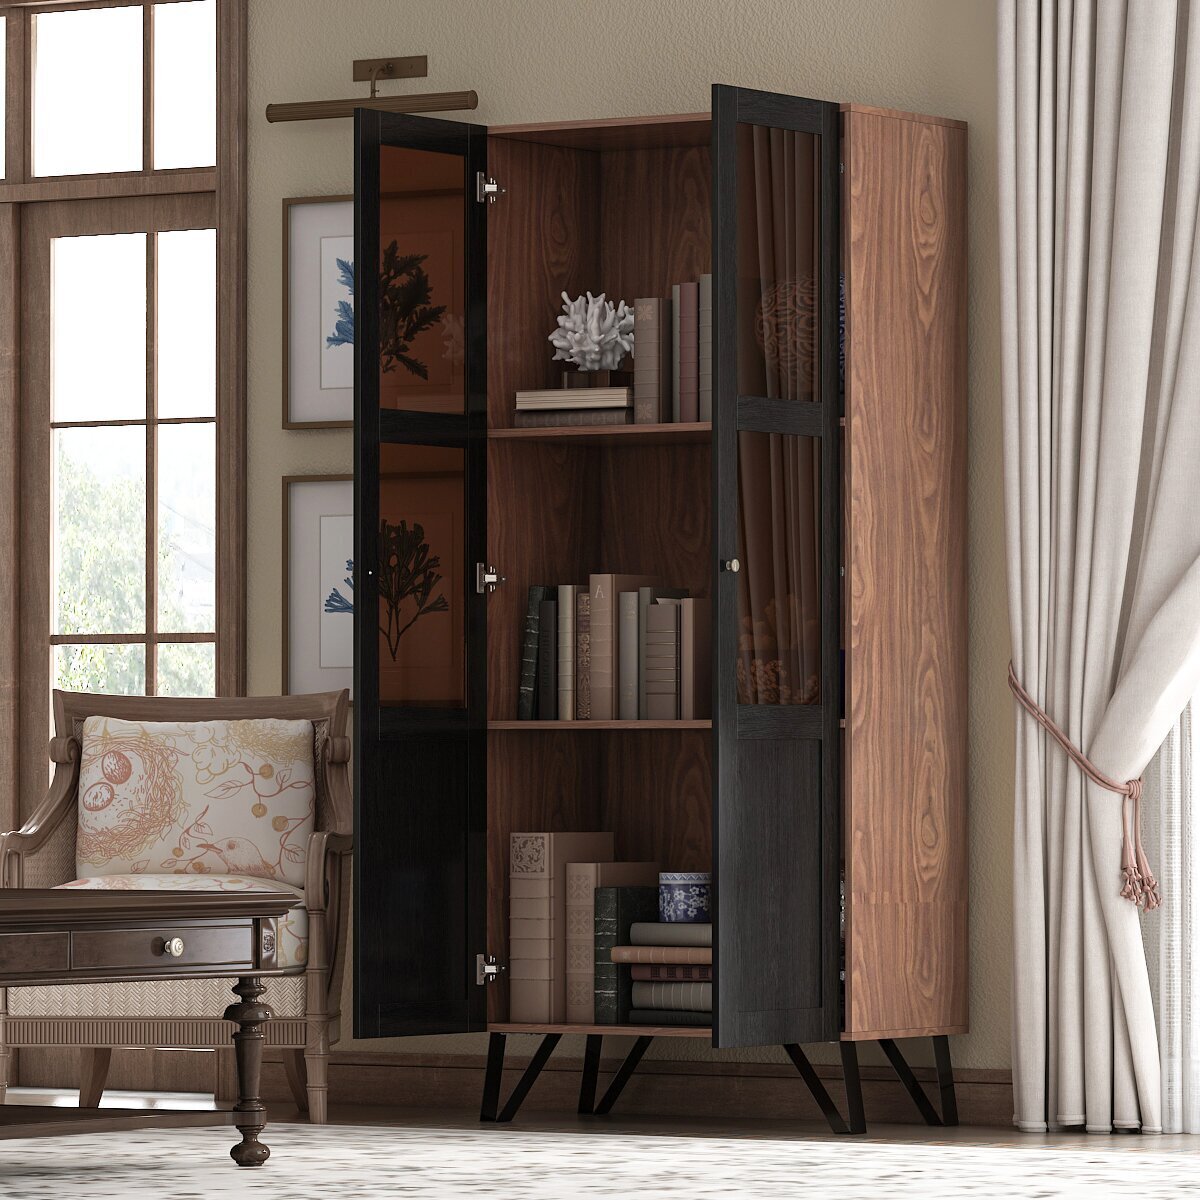 Wooden Bookcase With Doors on Hairpin Legs